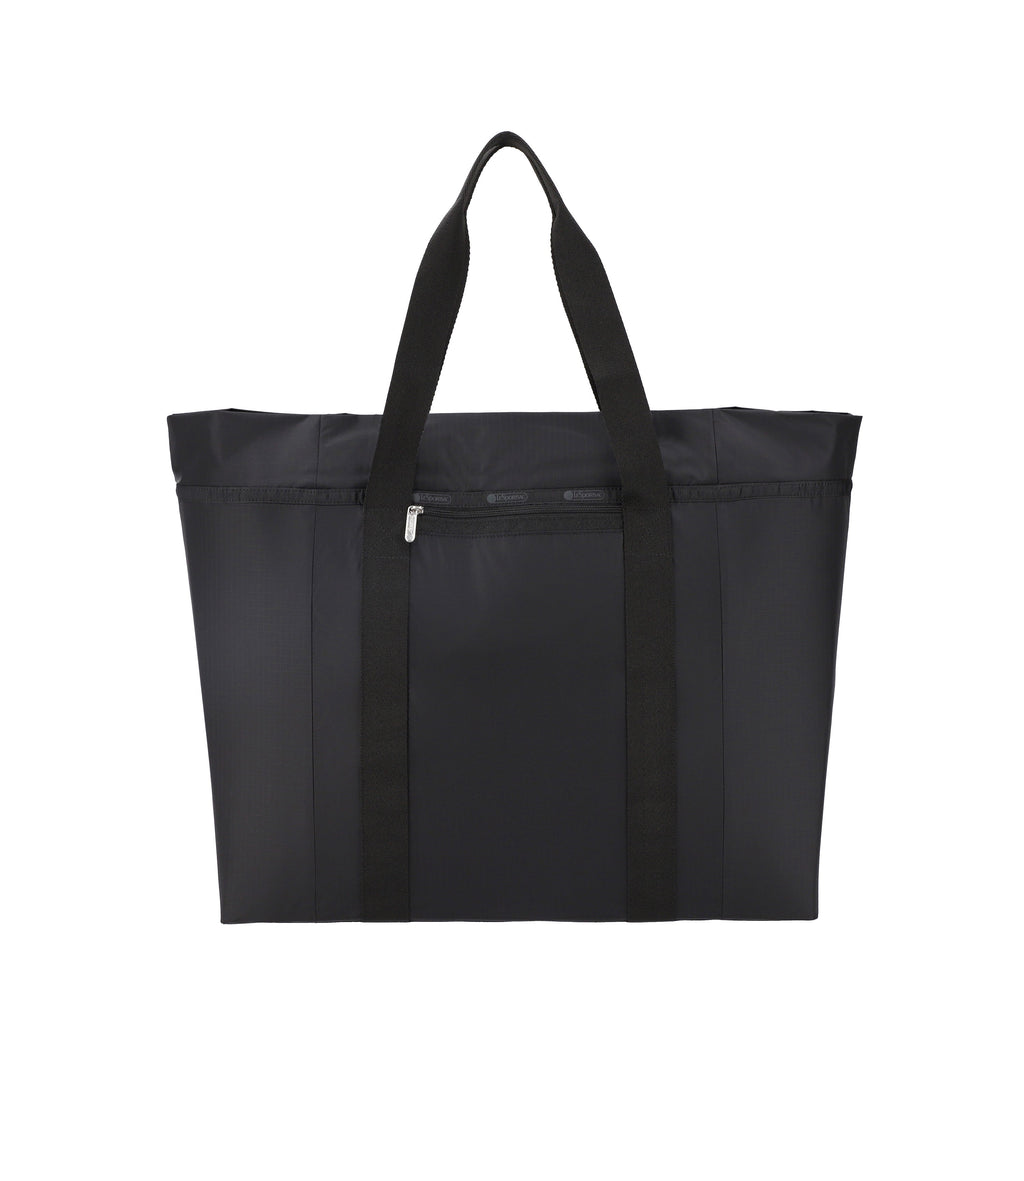 East/West Foldable Tote - Black solid – LeSportsac